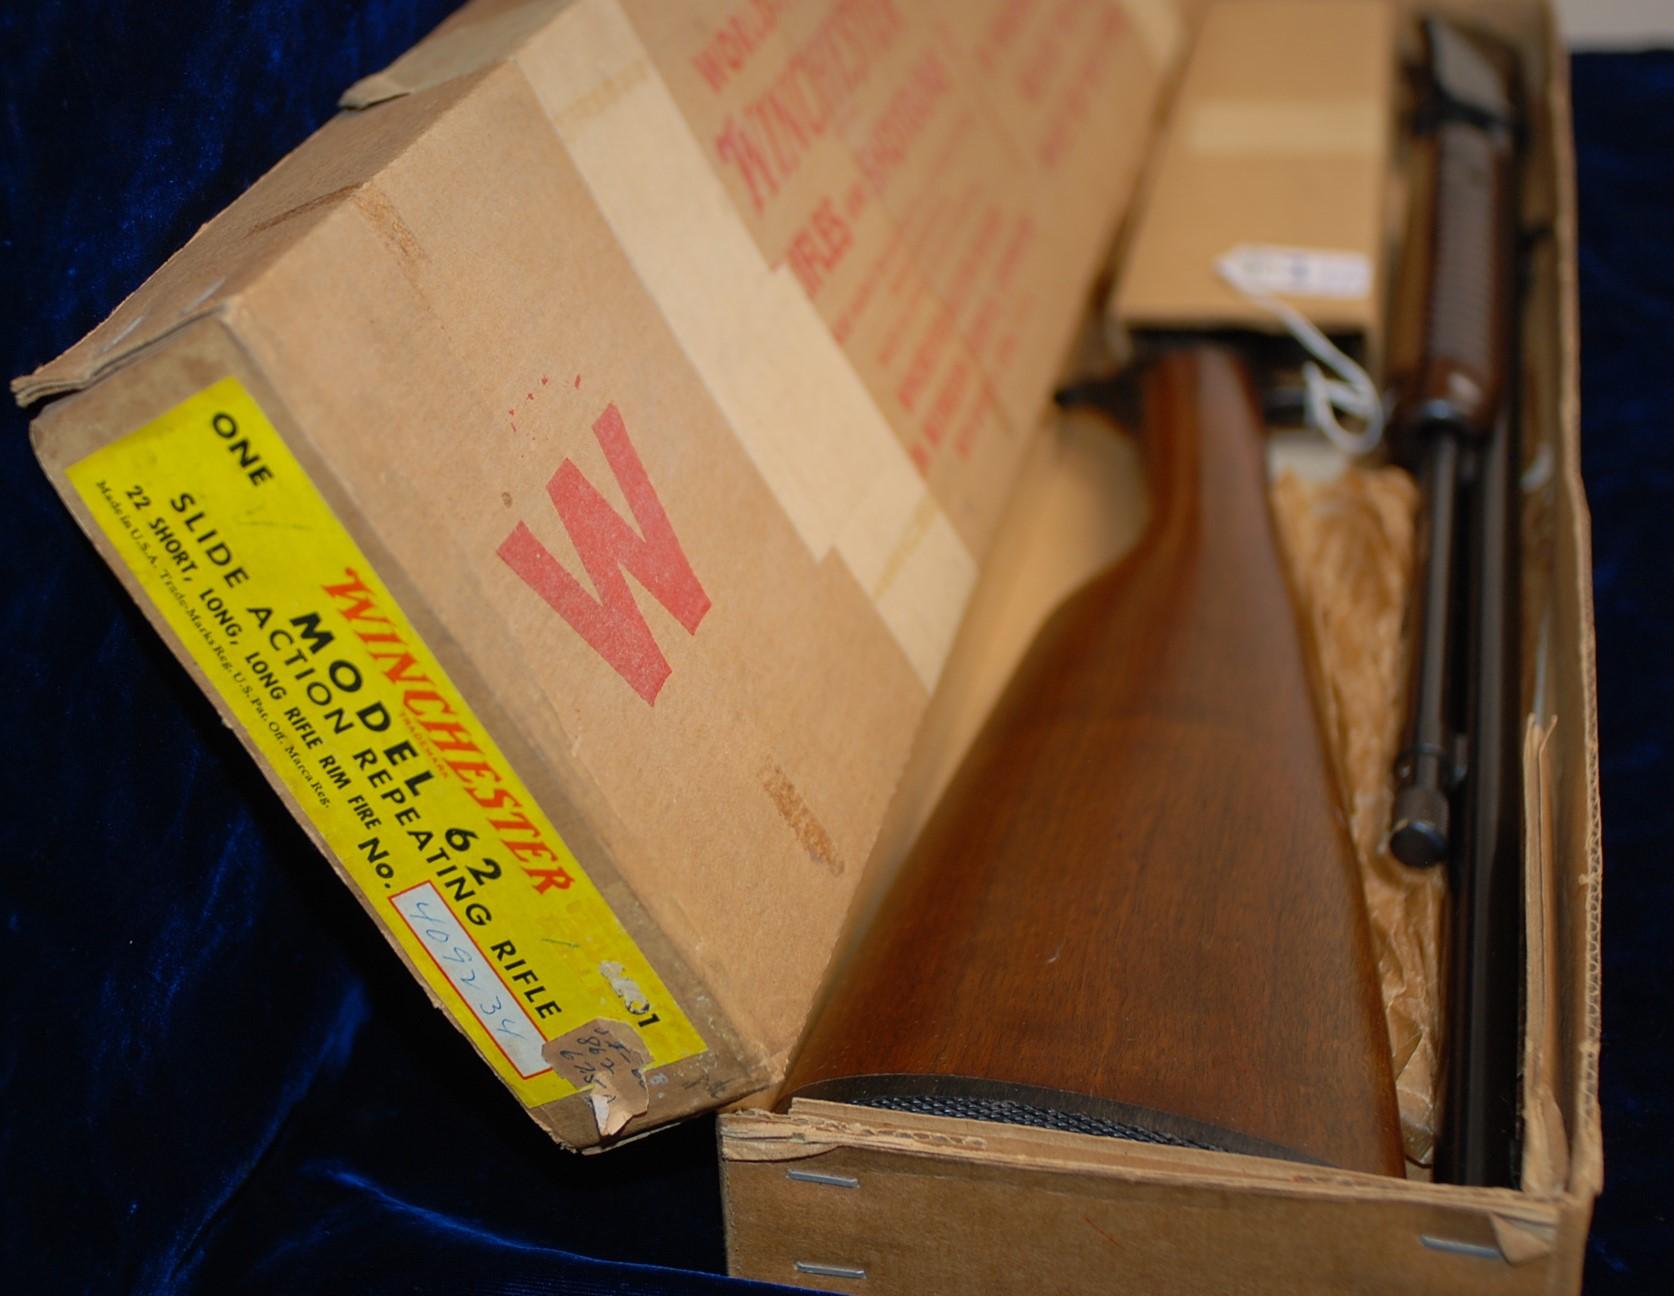 Boxed 1958 Winchester Model 62 Rifle